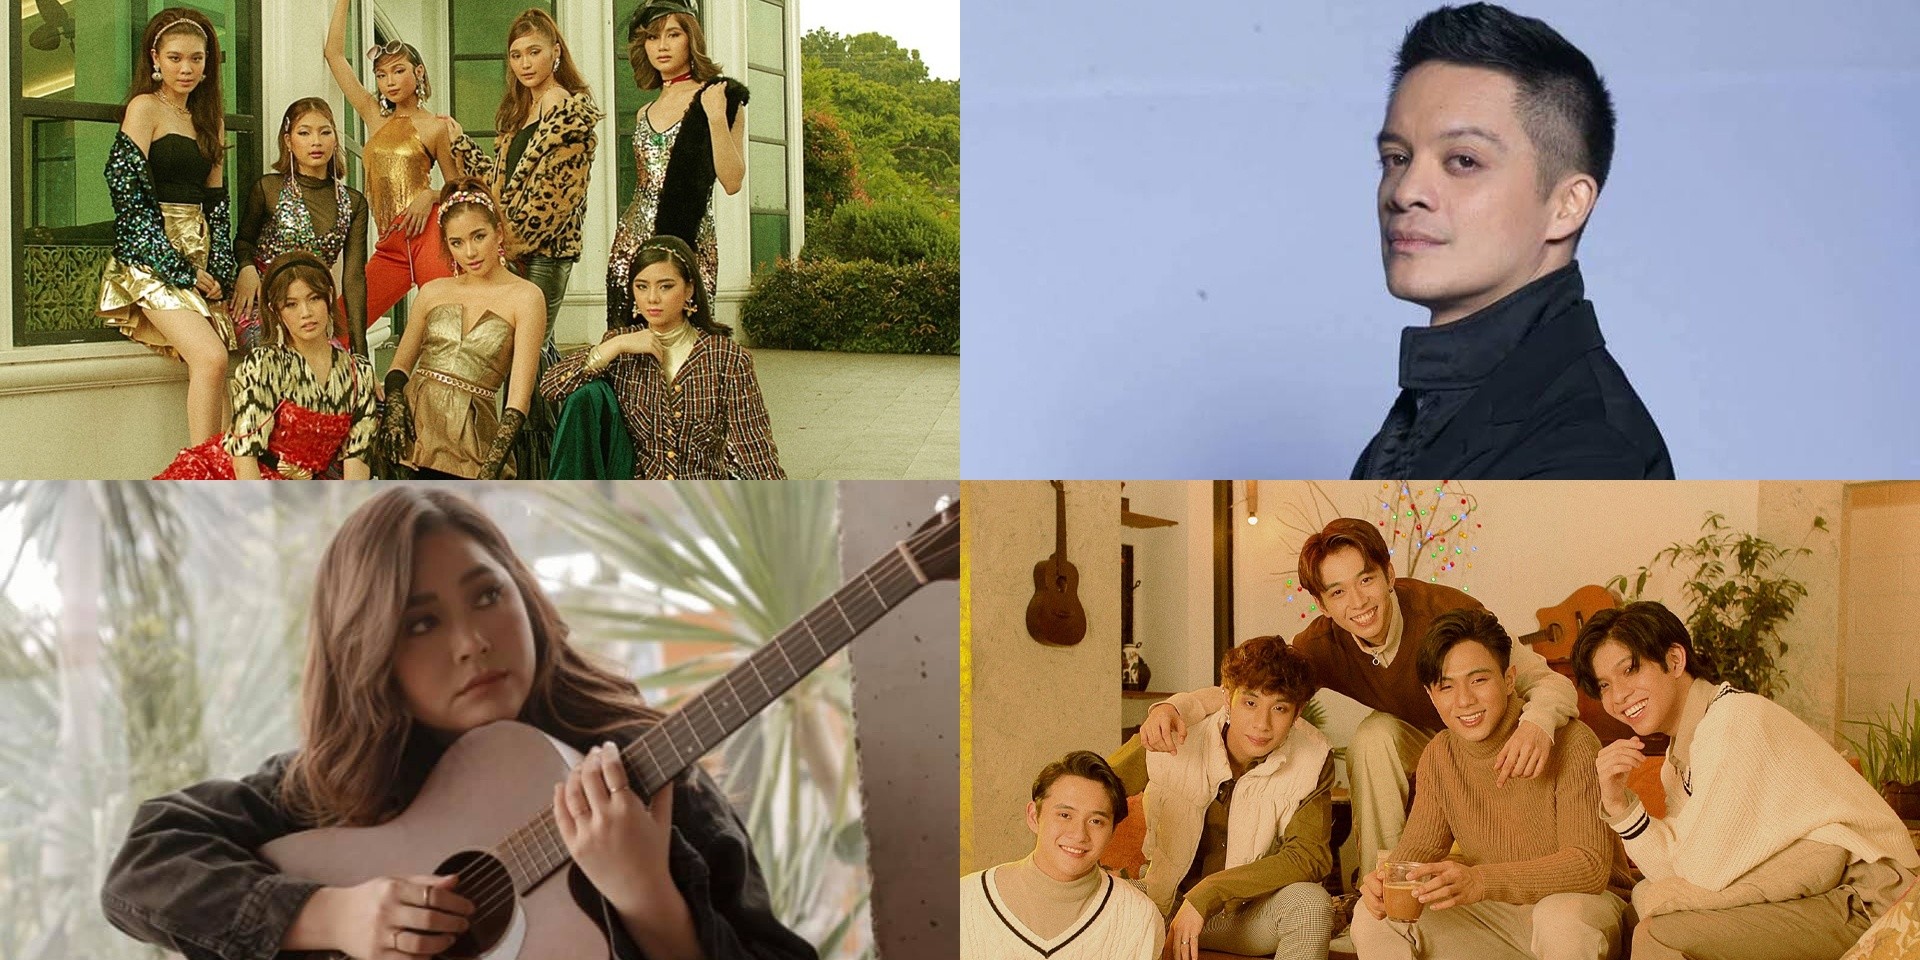 Moira Dela Torre, Bamboo, BGYO, BINI, and more to perform at One Music X 2021 in Dubai